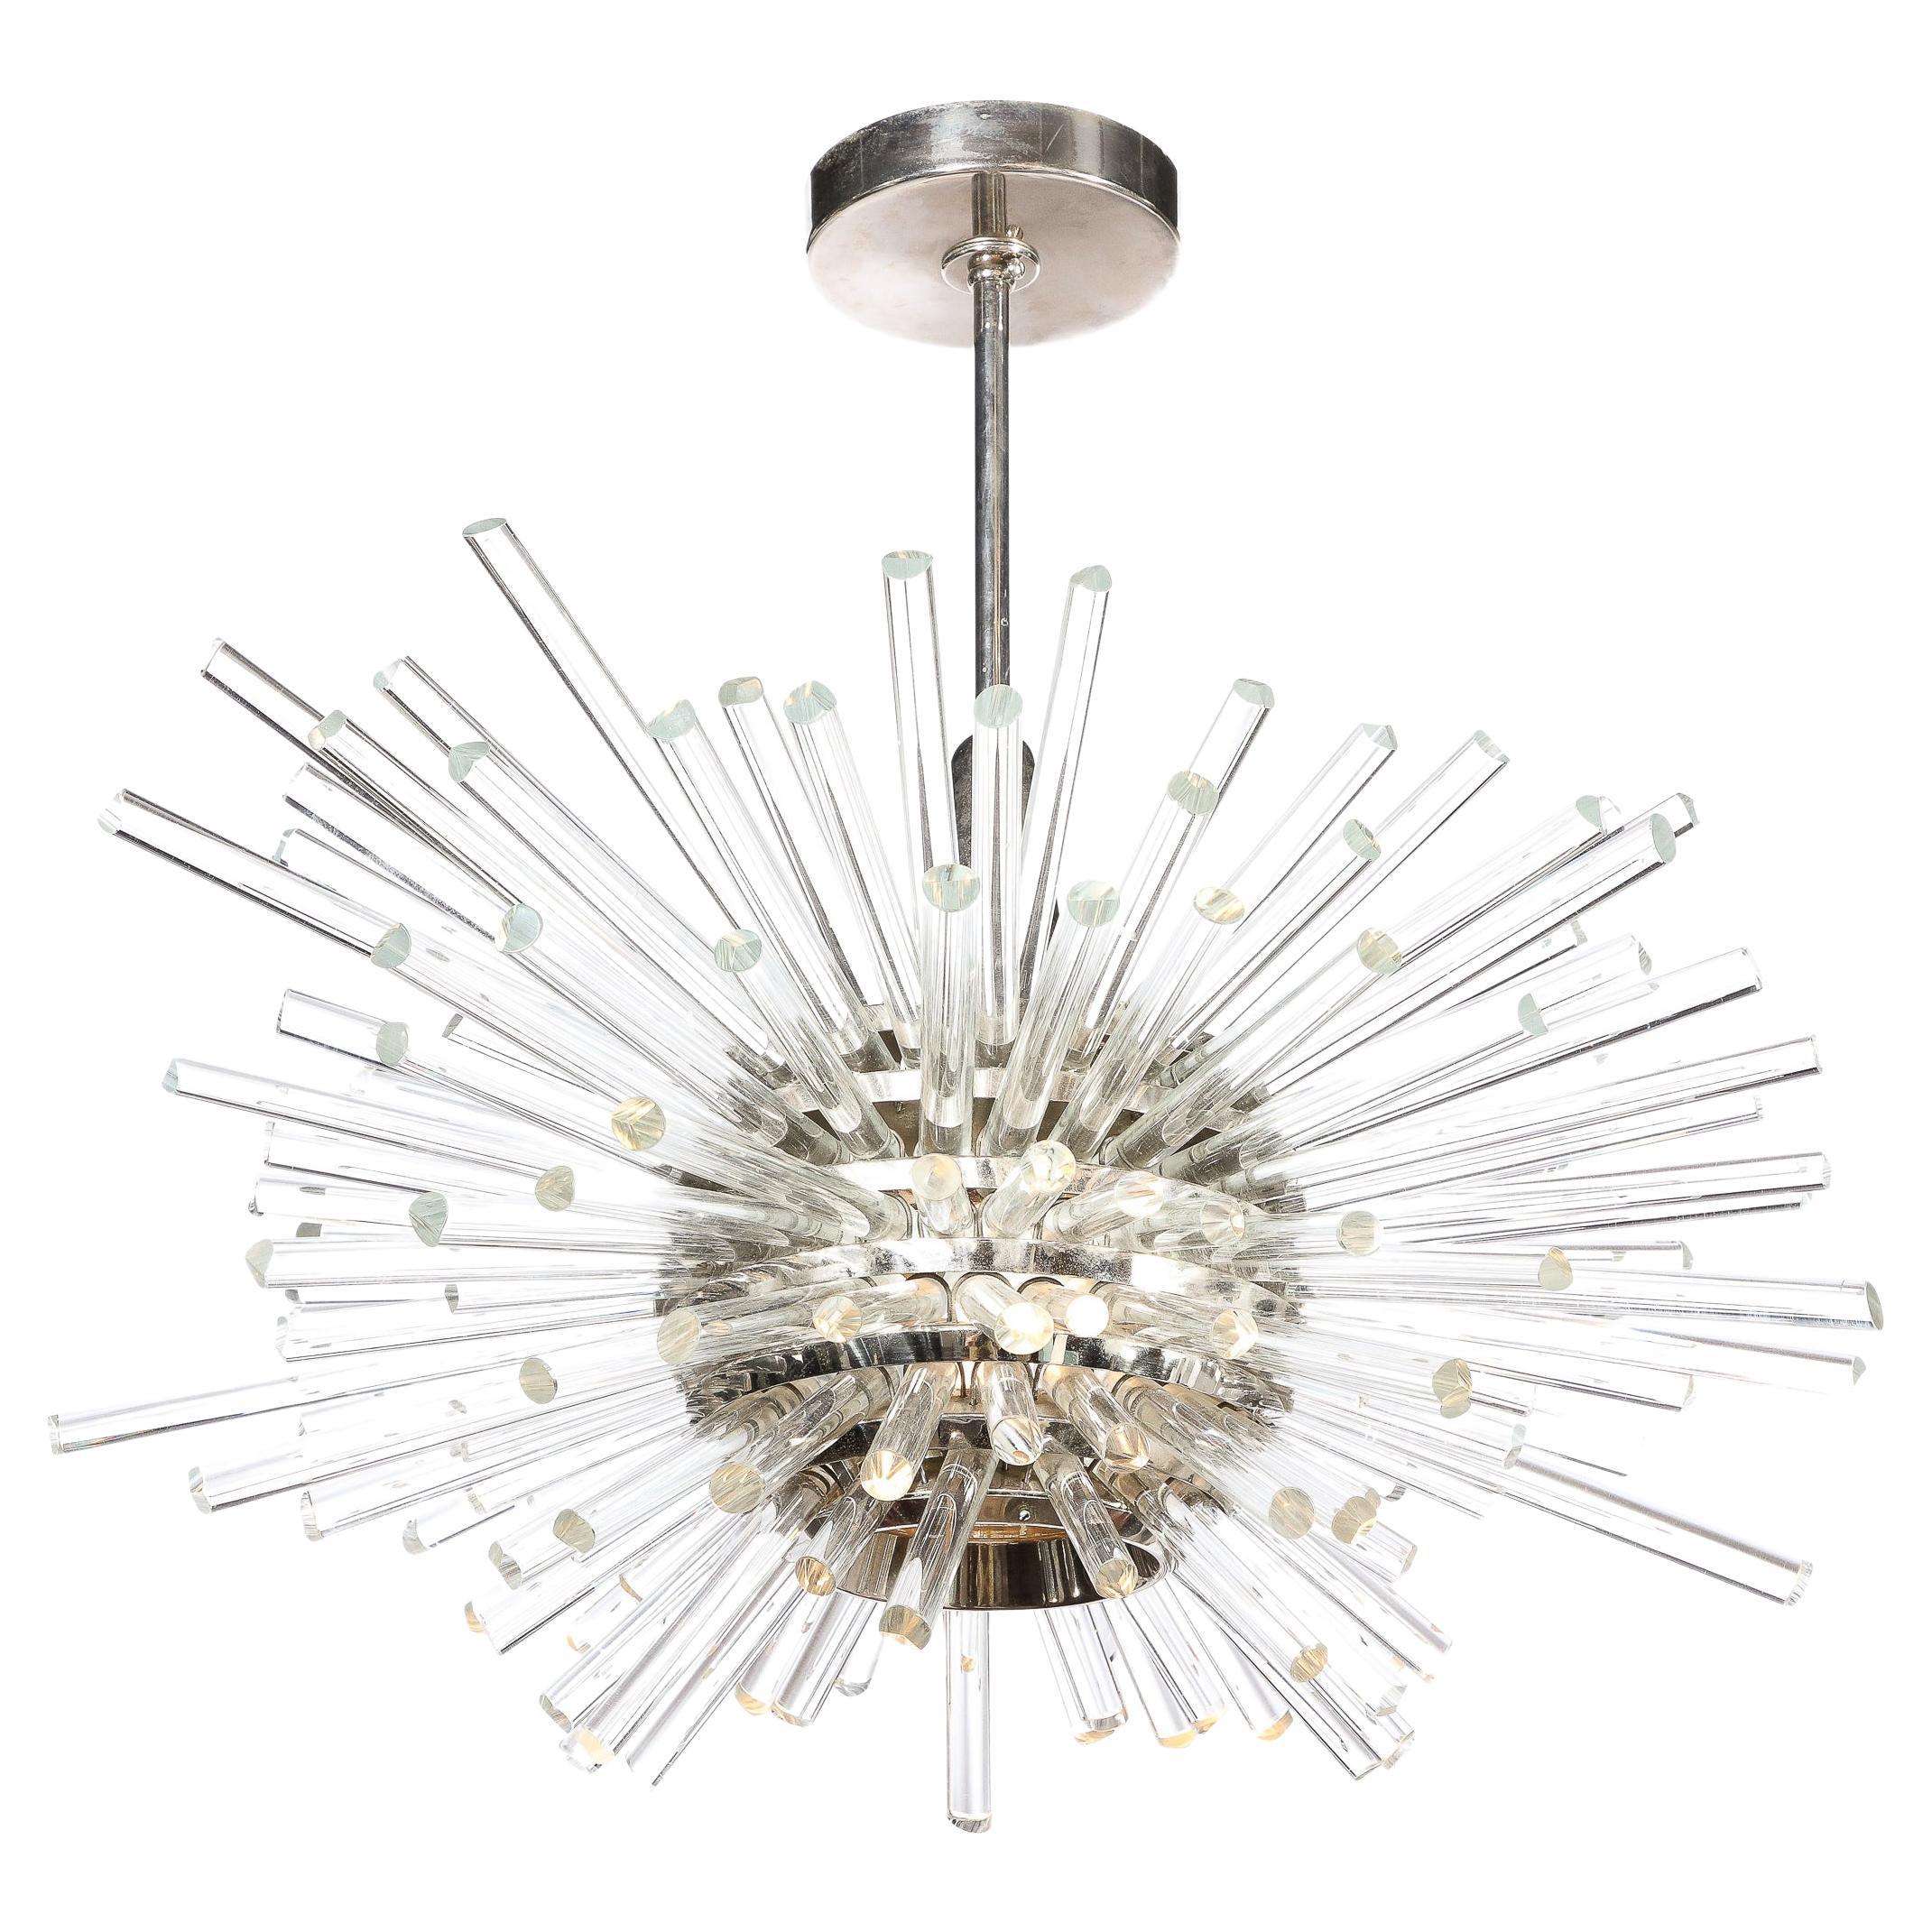 Mid-Century Miracle Chandelier in Glass and Chrome by Bakalowits & Sohne